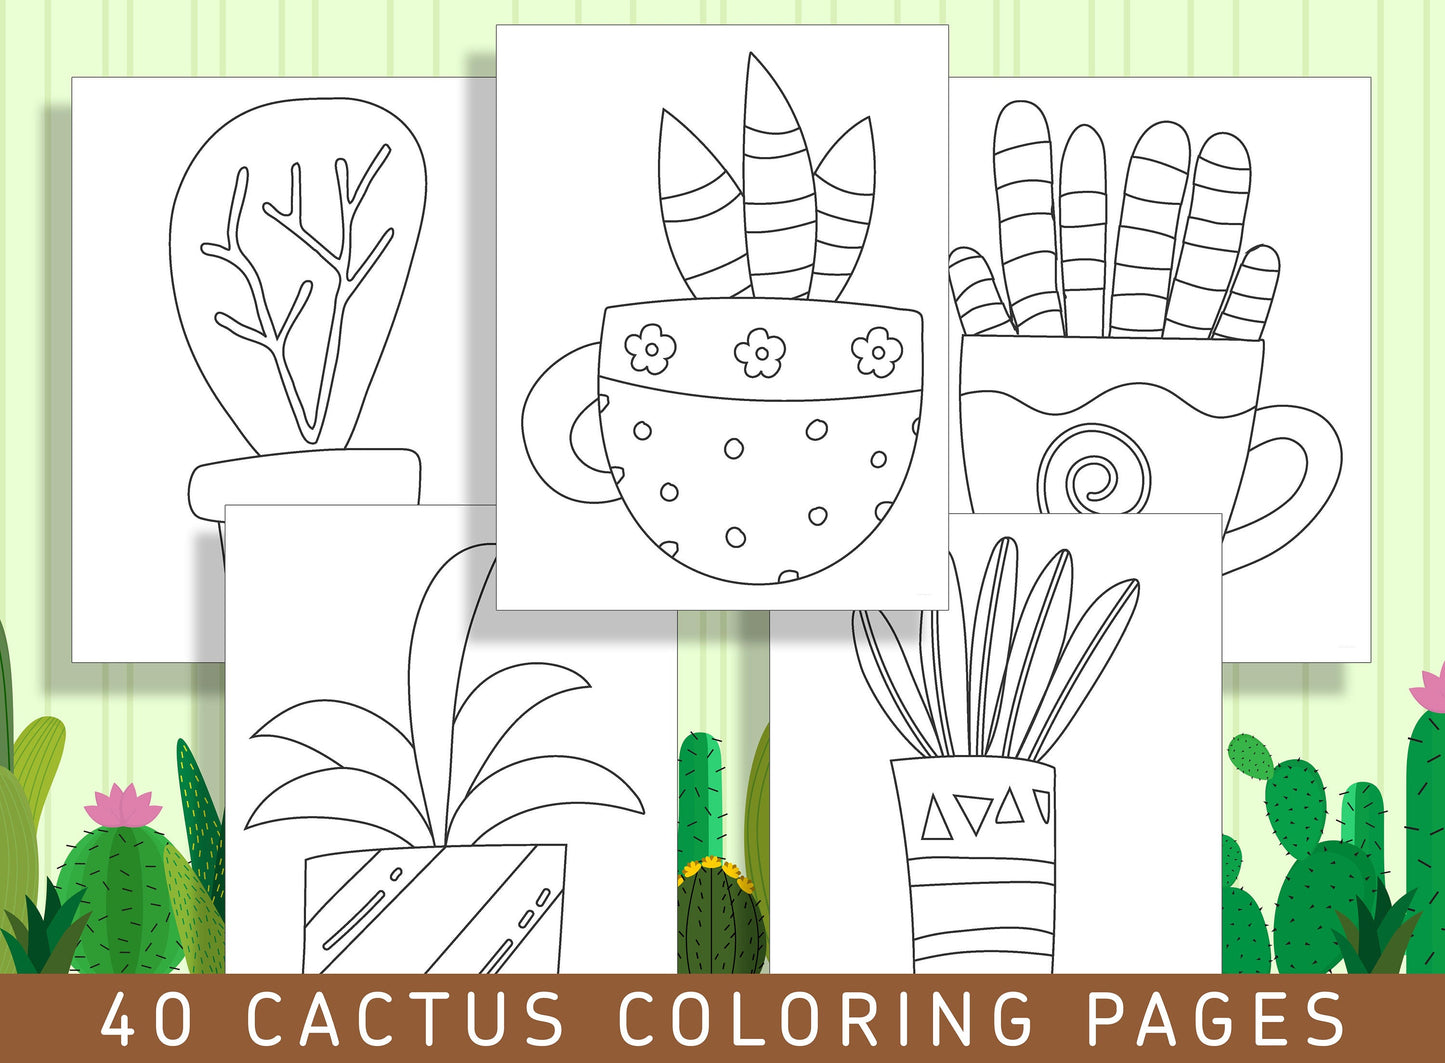 Spiky Fun for Little Ones: 40 Cactus Coloring Pages for Kindergarten and Preschoolers! - PDF File, Instant Download